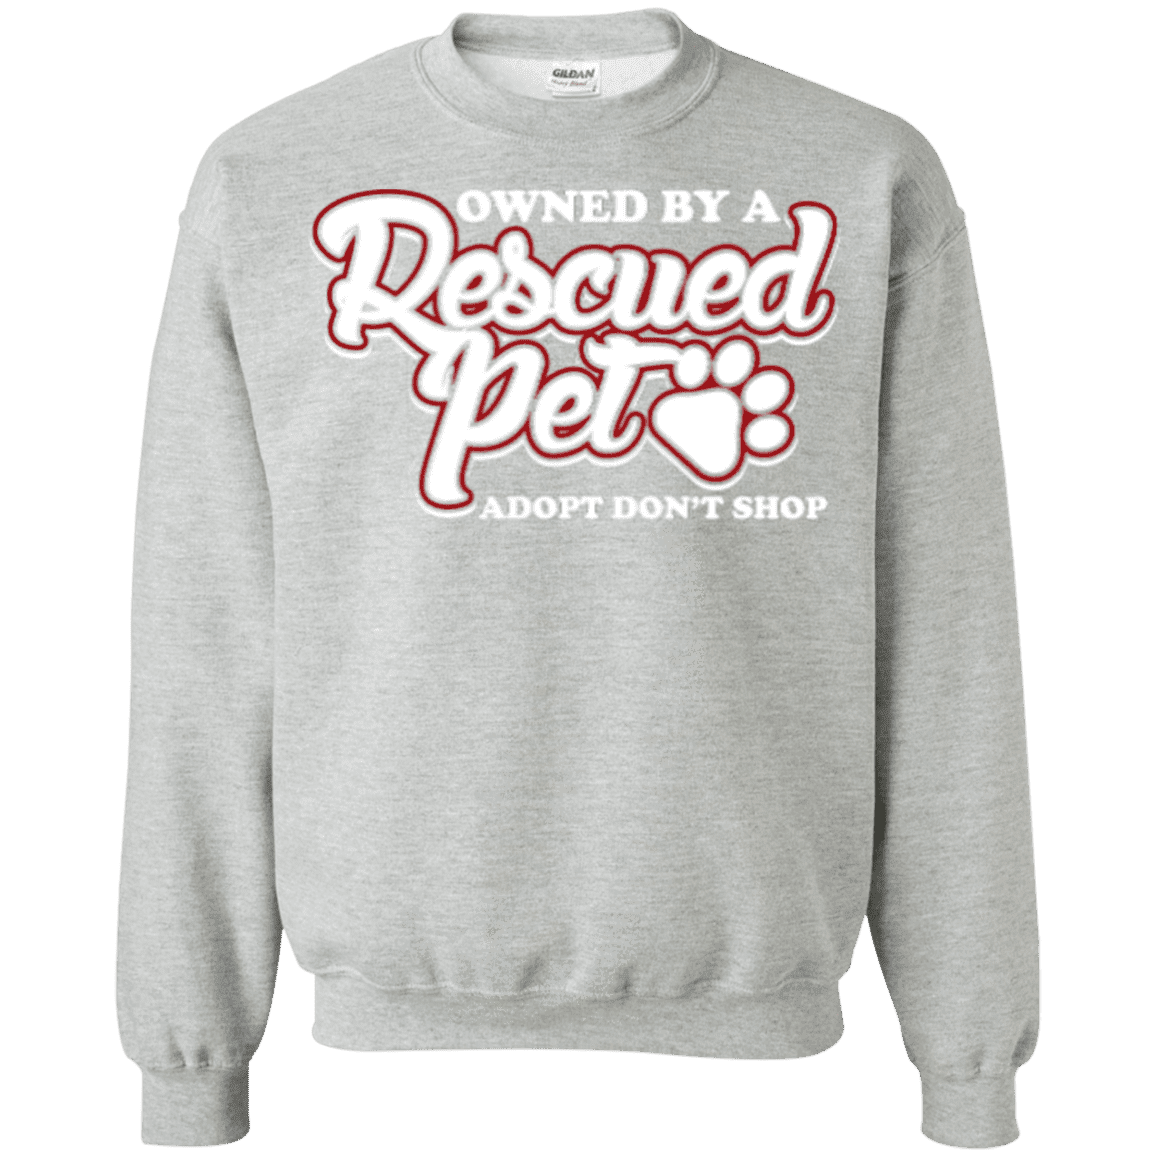 Owned By A Rescued Pet - Sweatshirt.